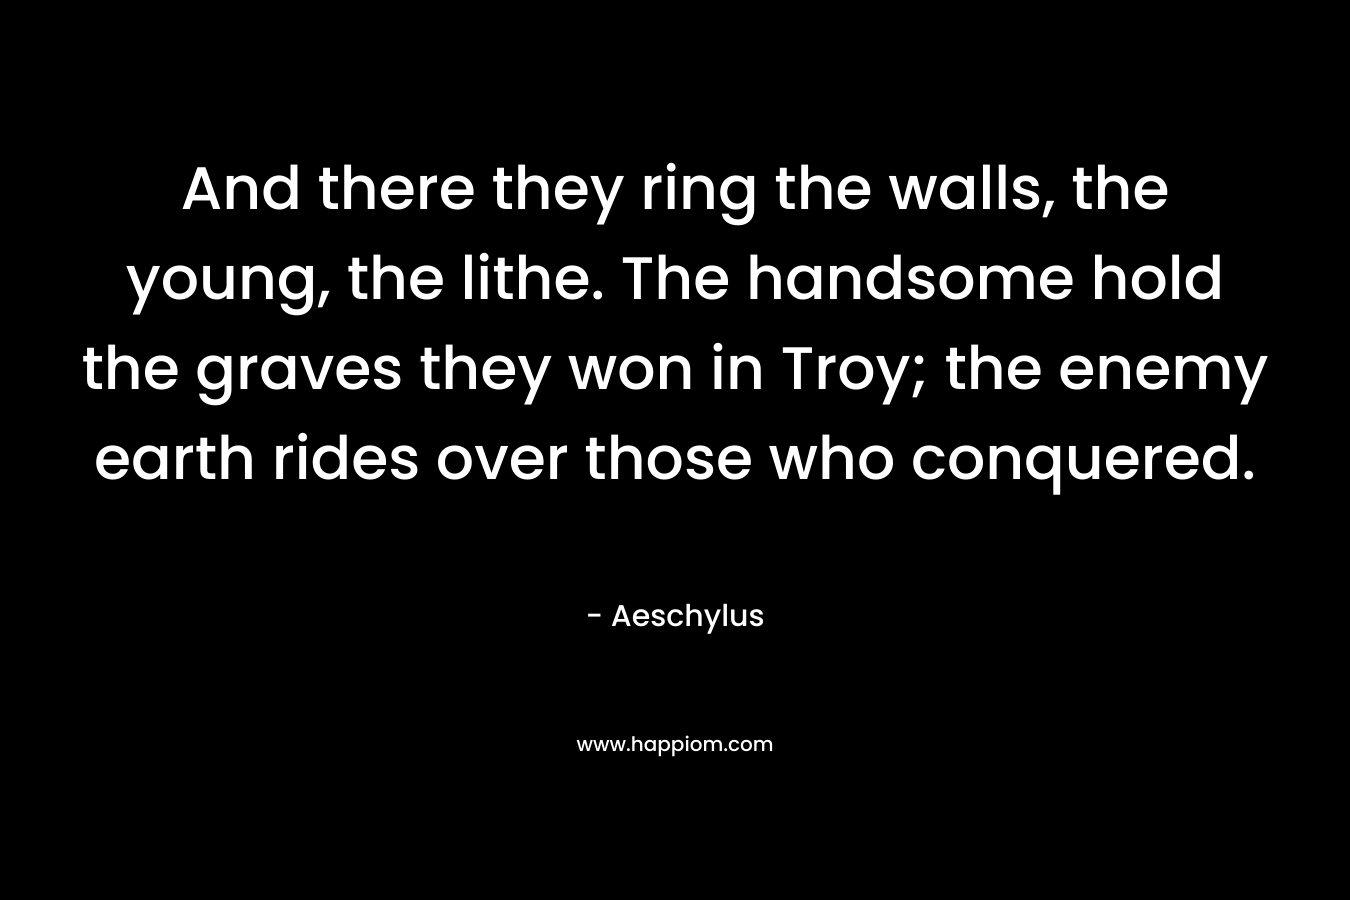 And there they ring the walls, the young, the lithe. The handsome hold the graves they won in Troy; the enemy earth rides over those who conquered. – Aeschylus